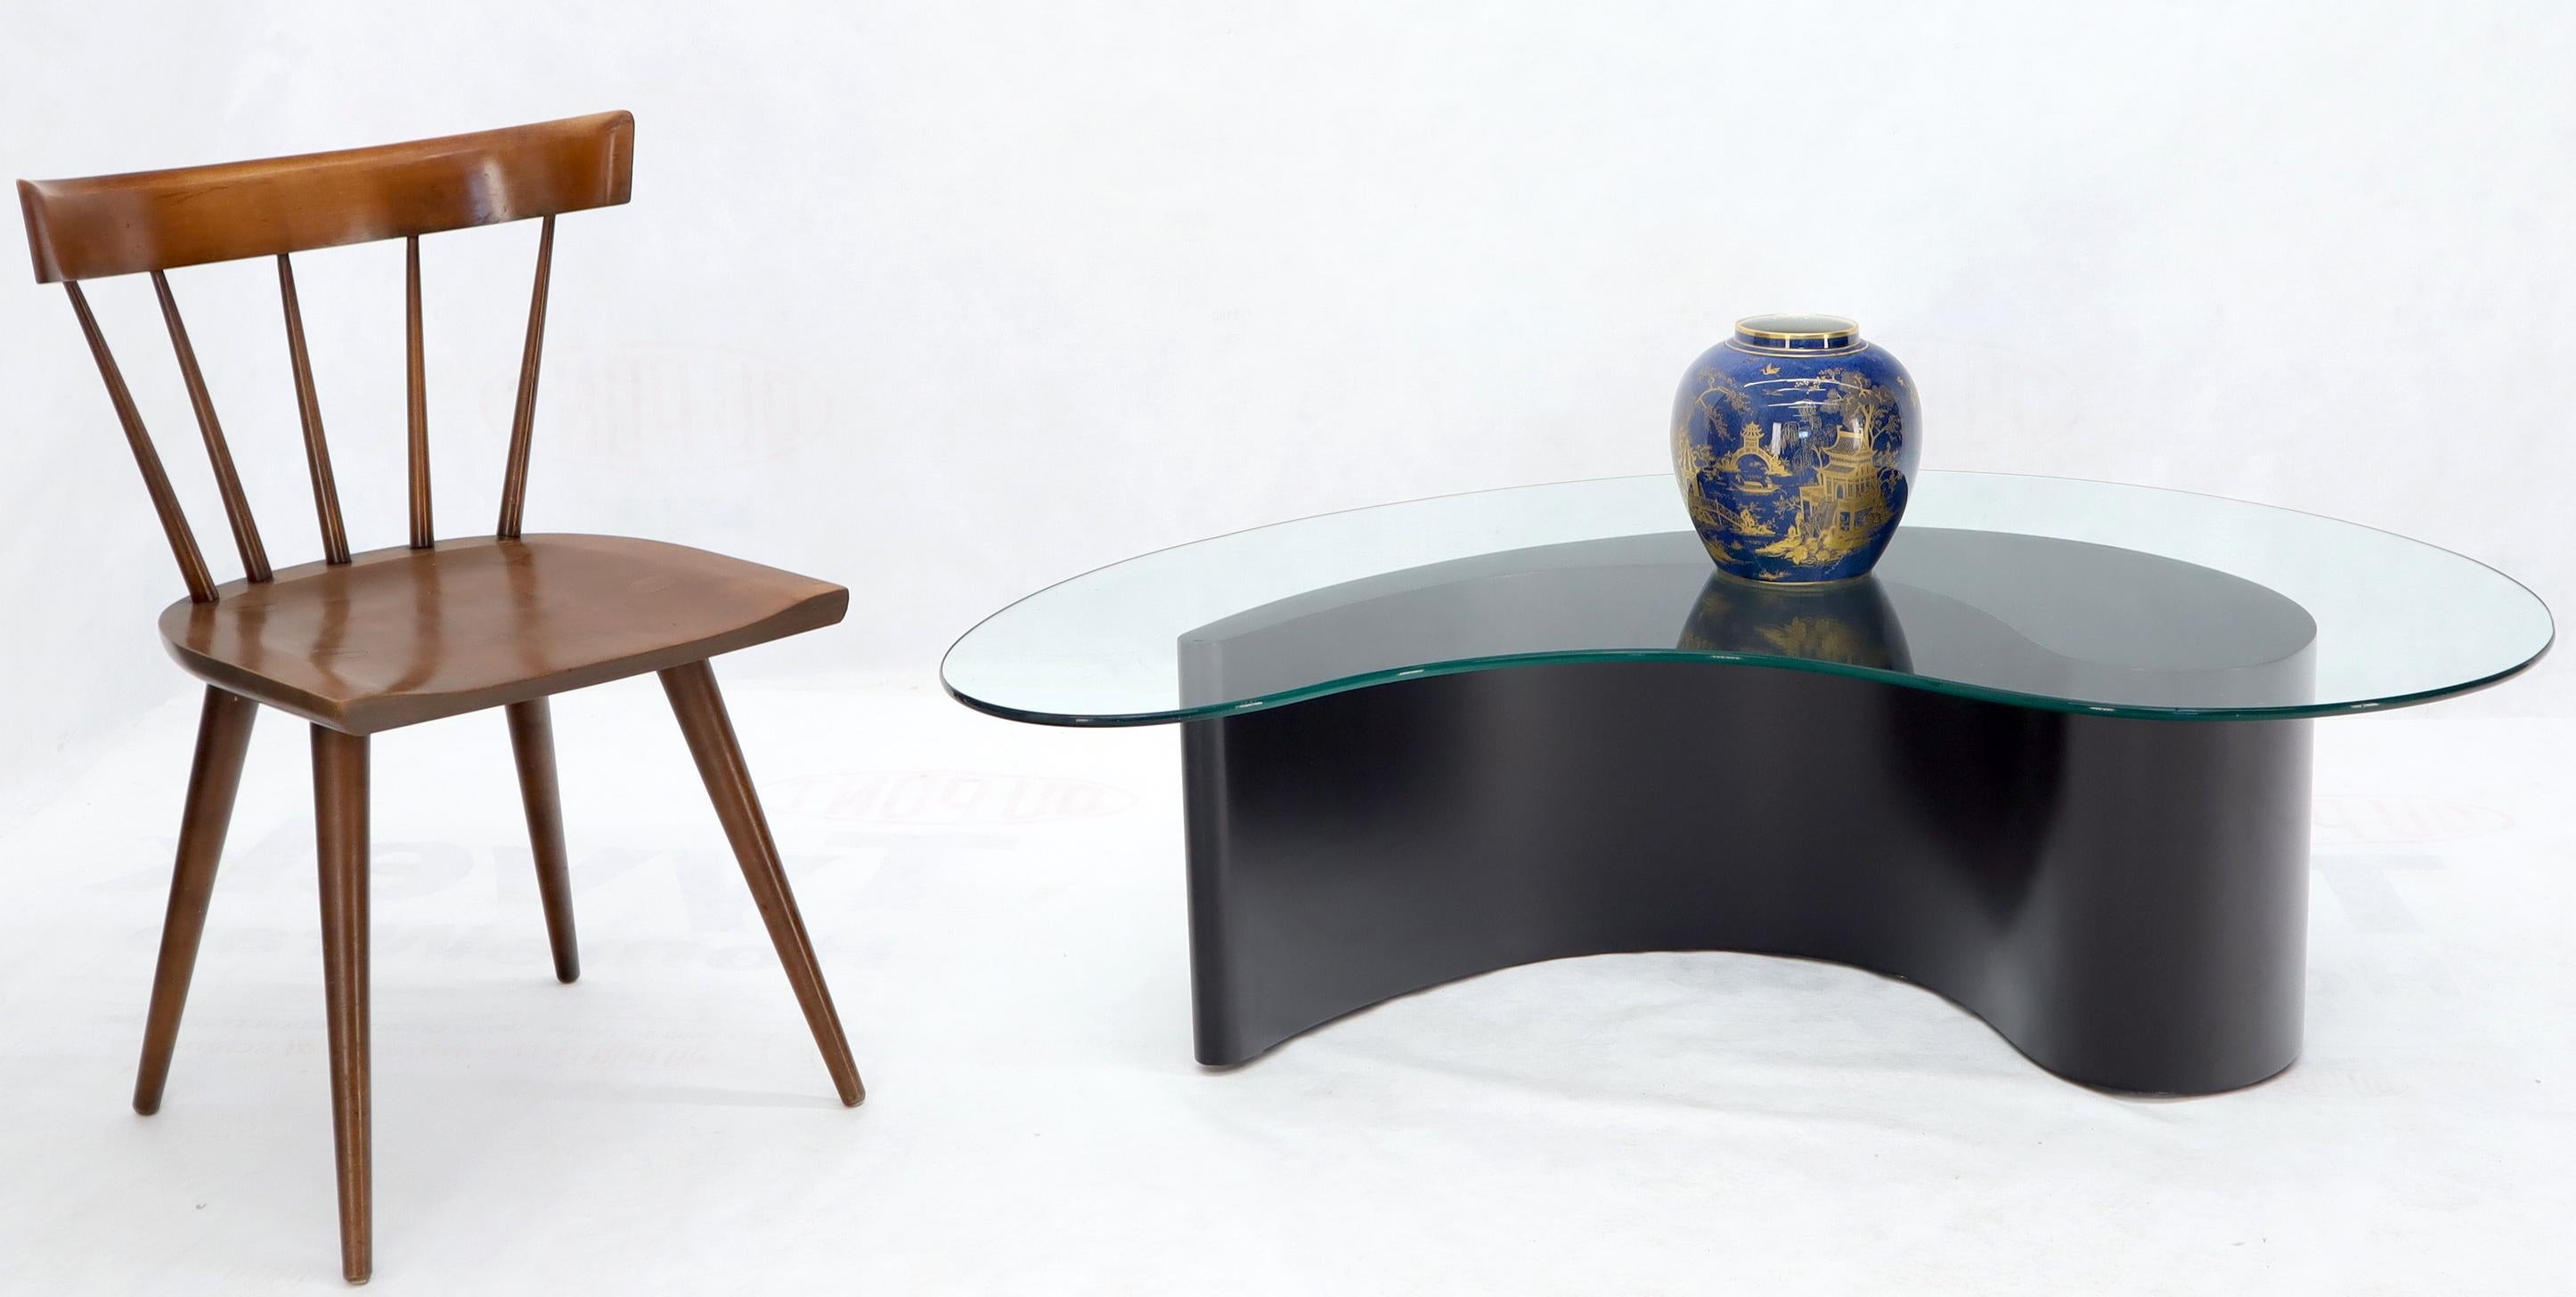 Molded Apostrophe Shape Black Lacquer Kidney Shape Glass Top Coffee Table